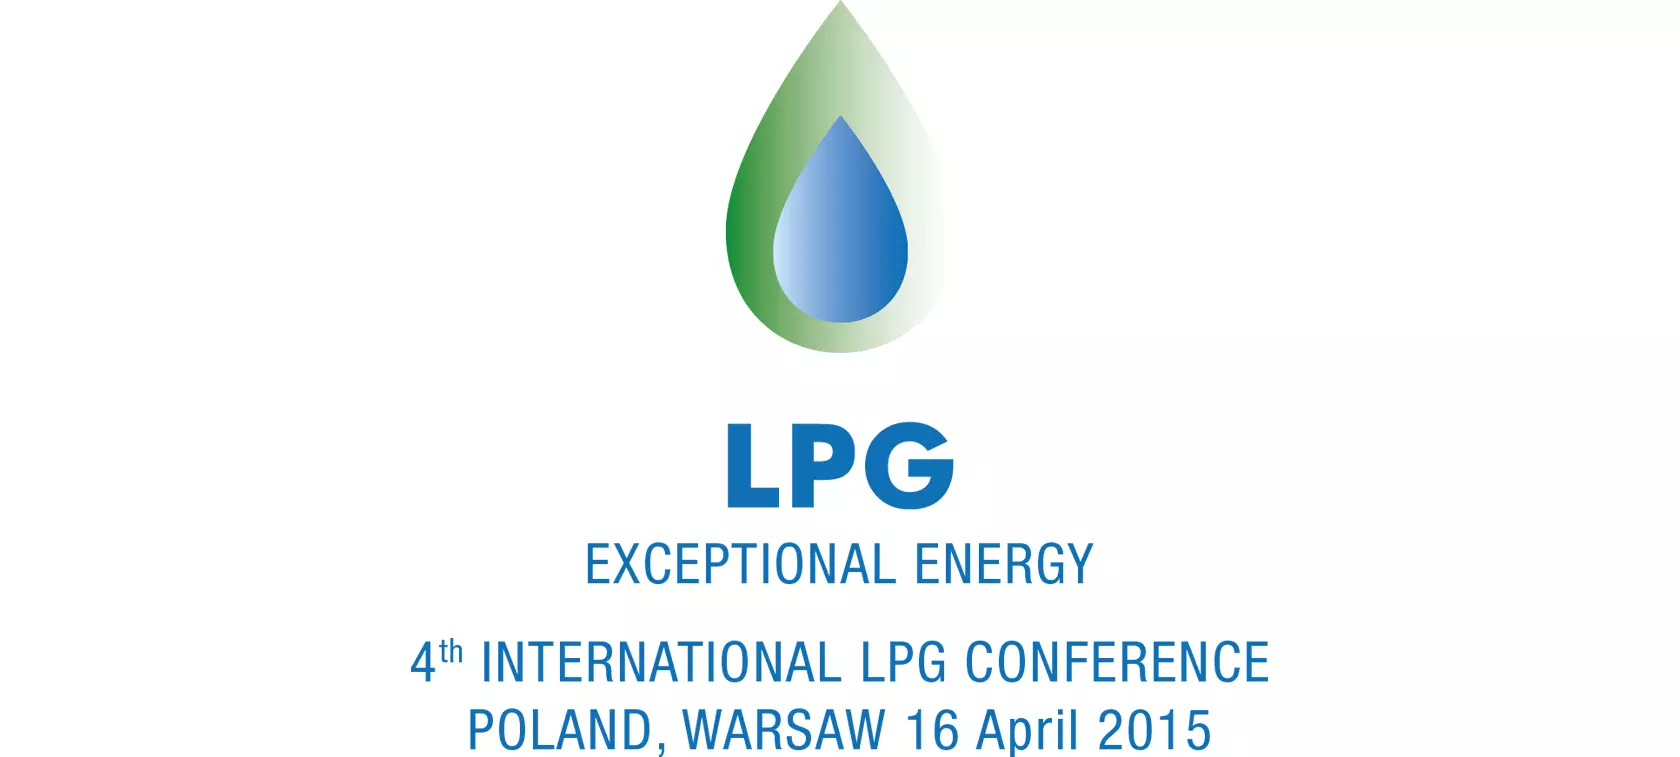 LPG - Exceptional Energy: fourth time running